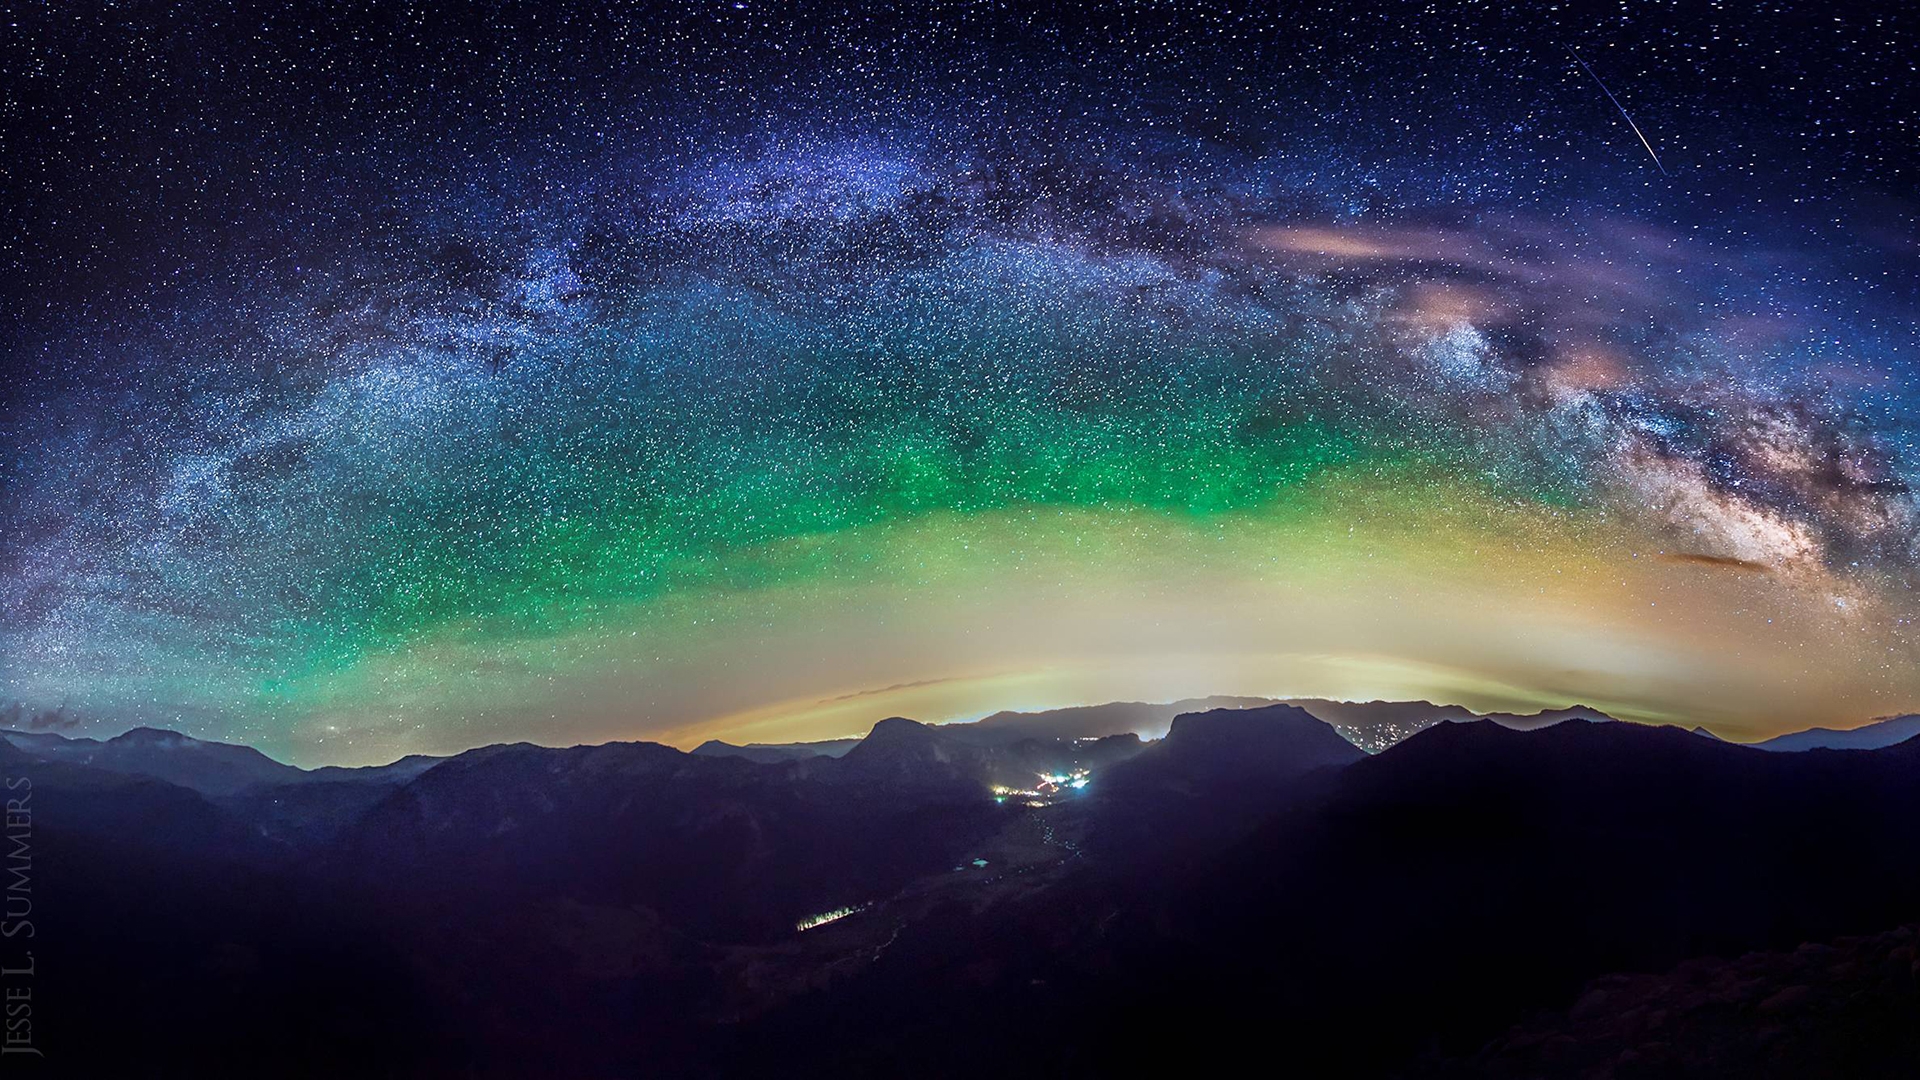 Weekly Wallpaper: Enchant Your Desktop With These Starry Night Images